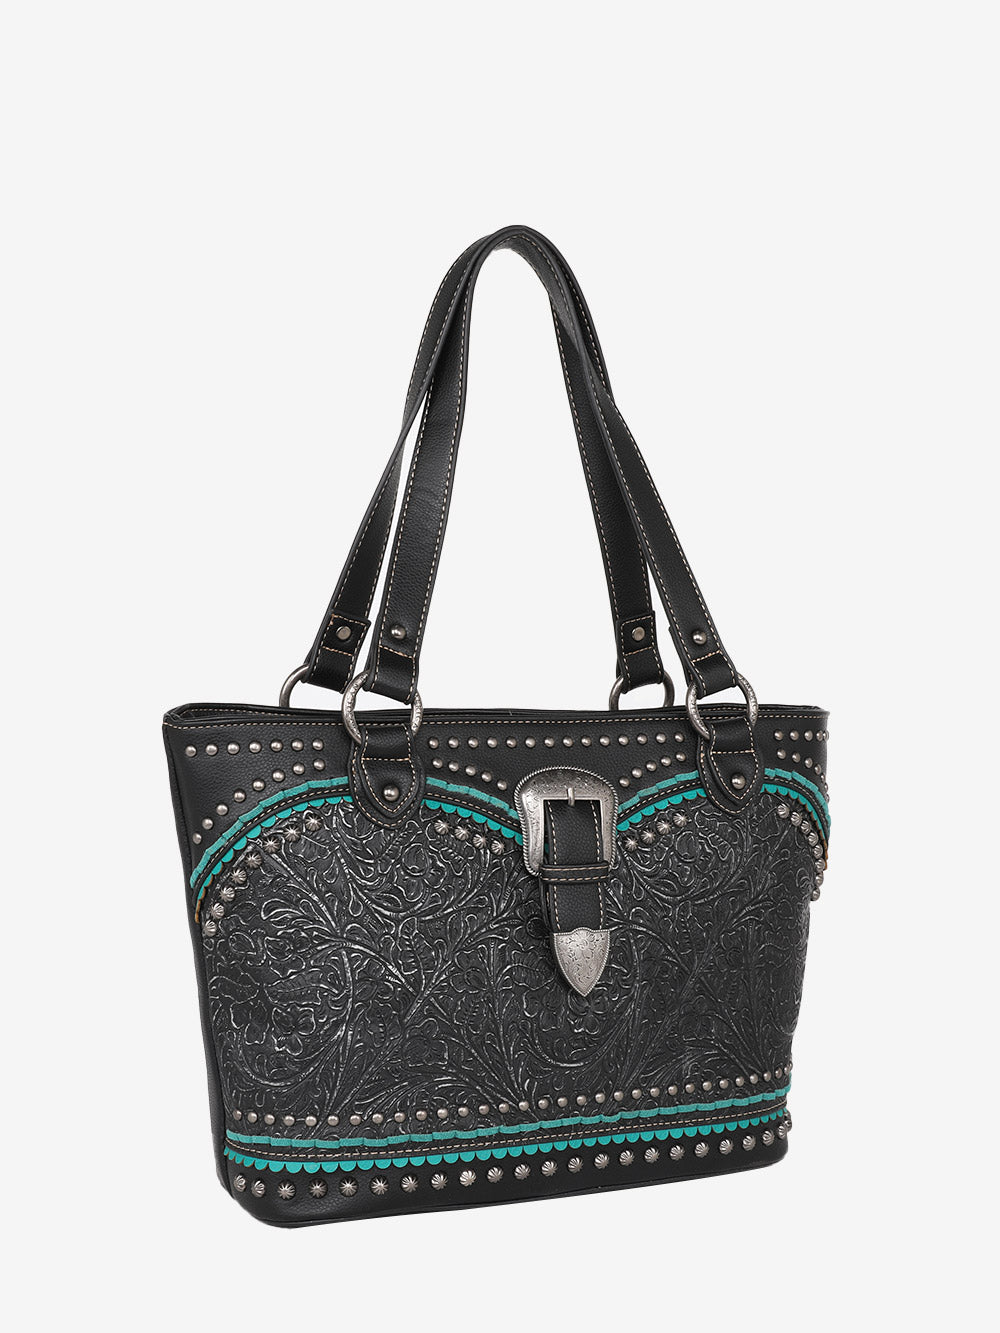 American Bling Black Embossed Floral Tote Set - Montana West World